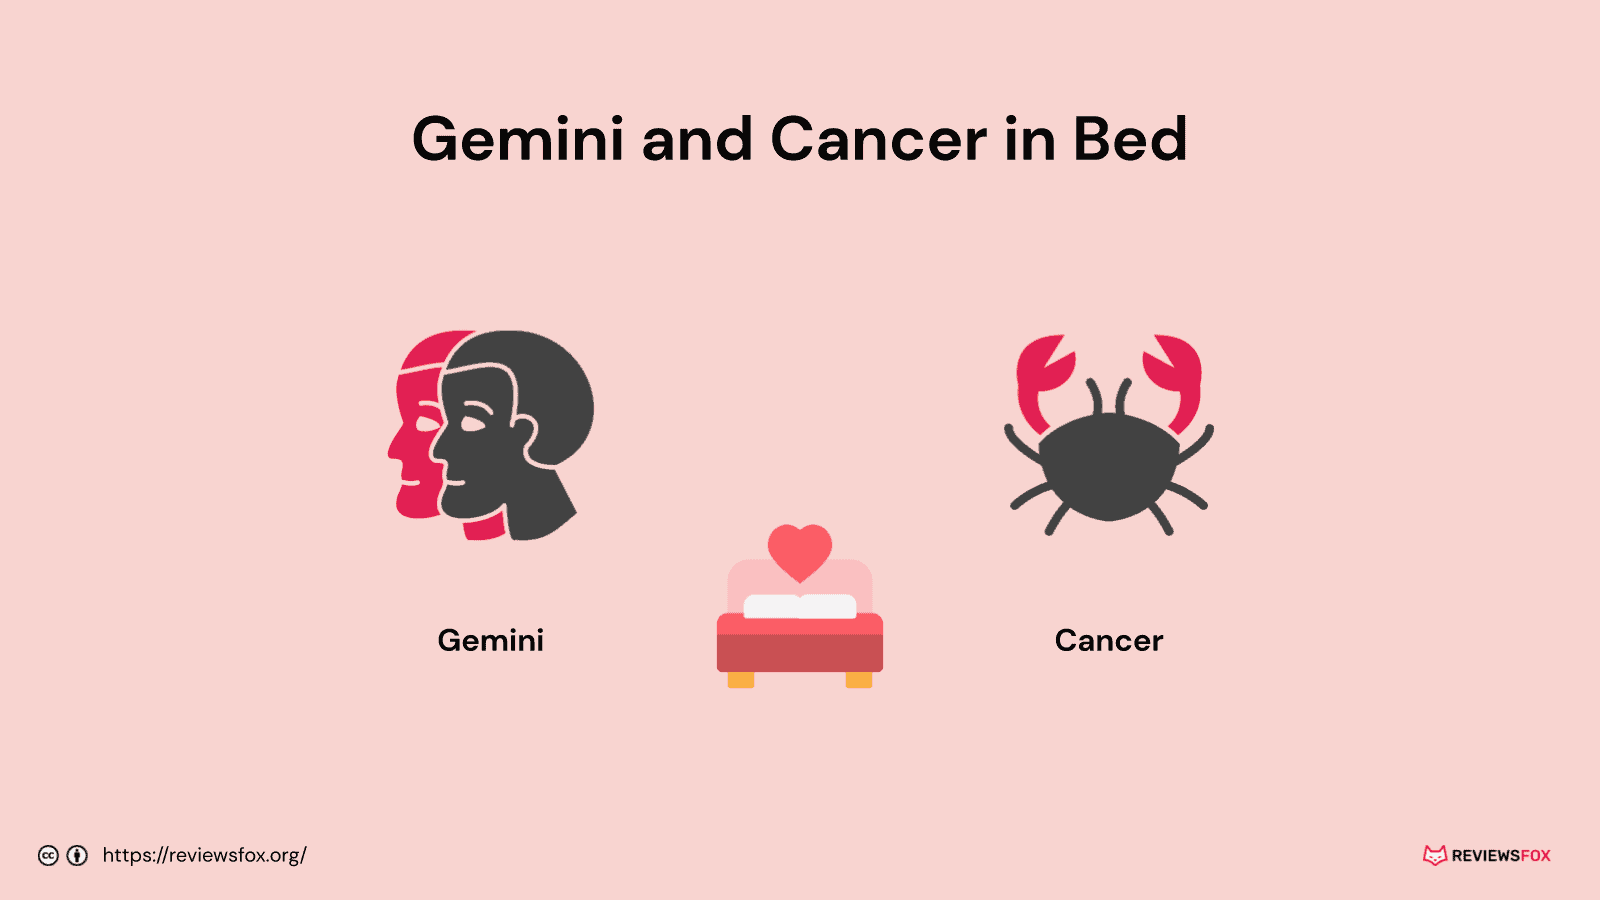 Gemini and Cancer in bed